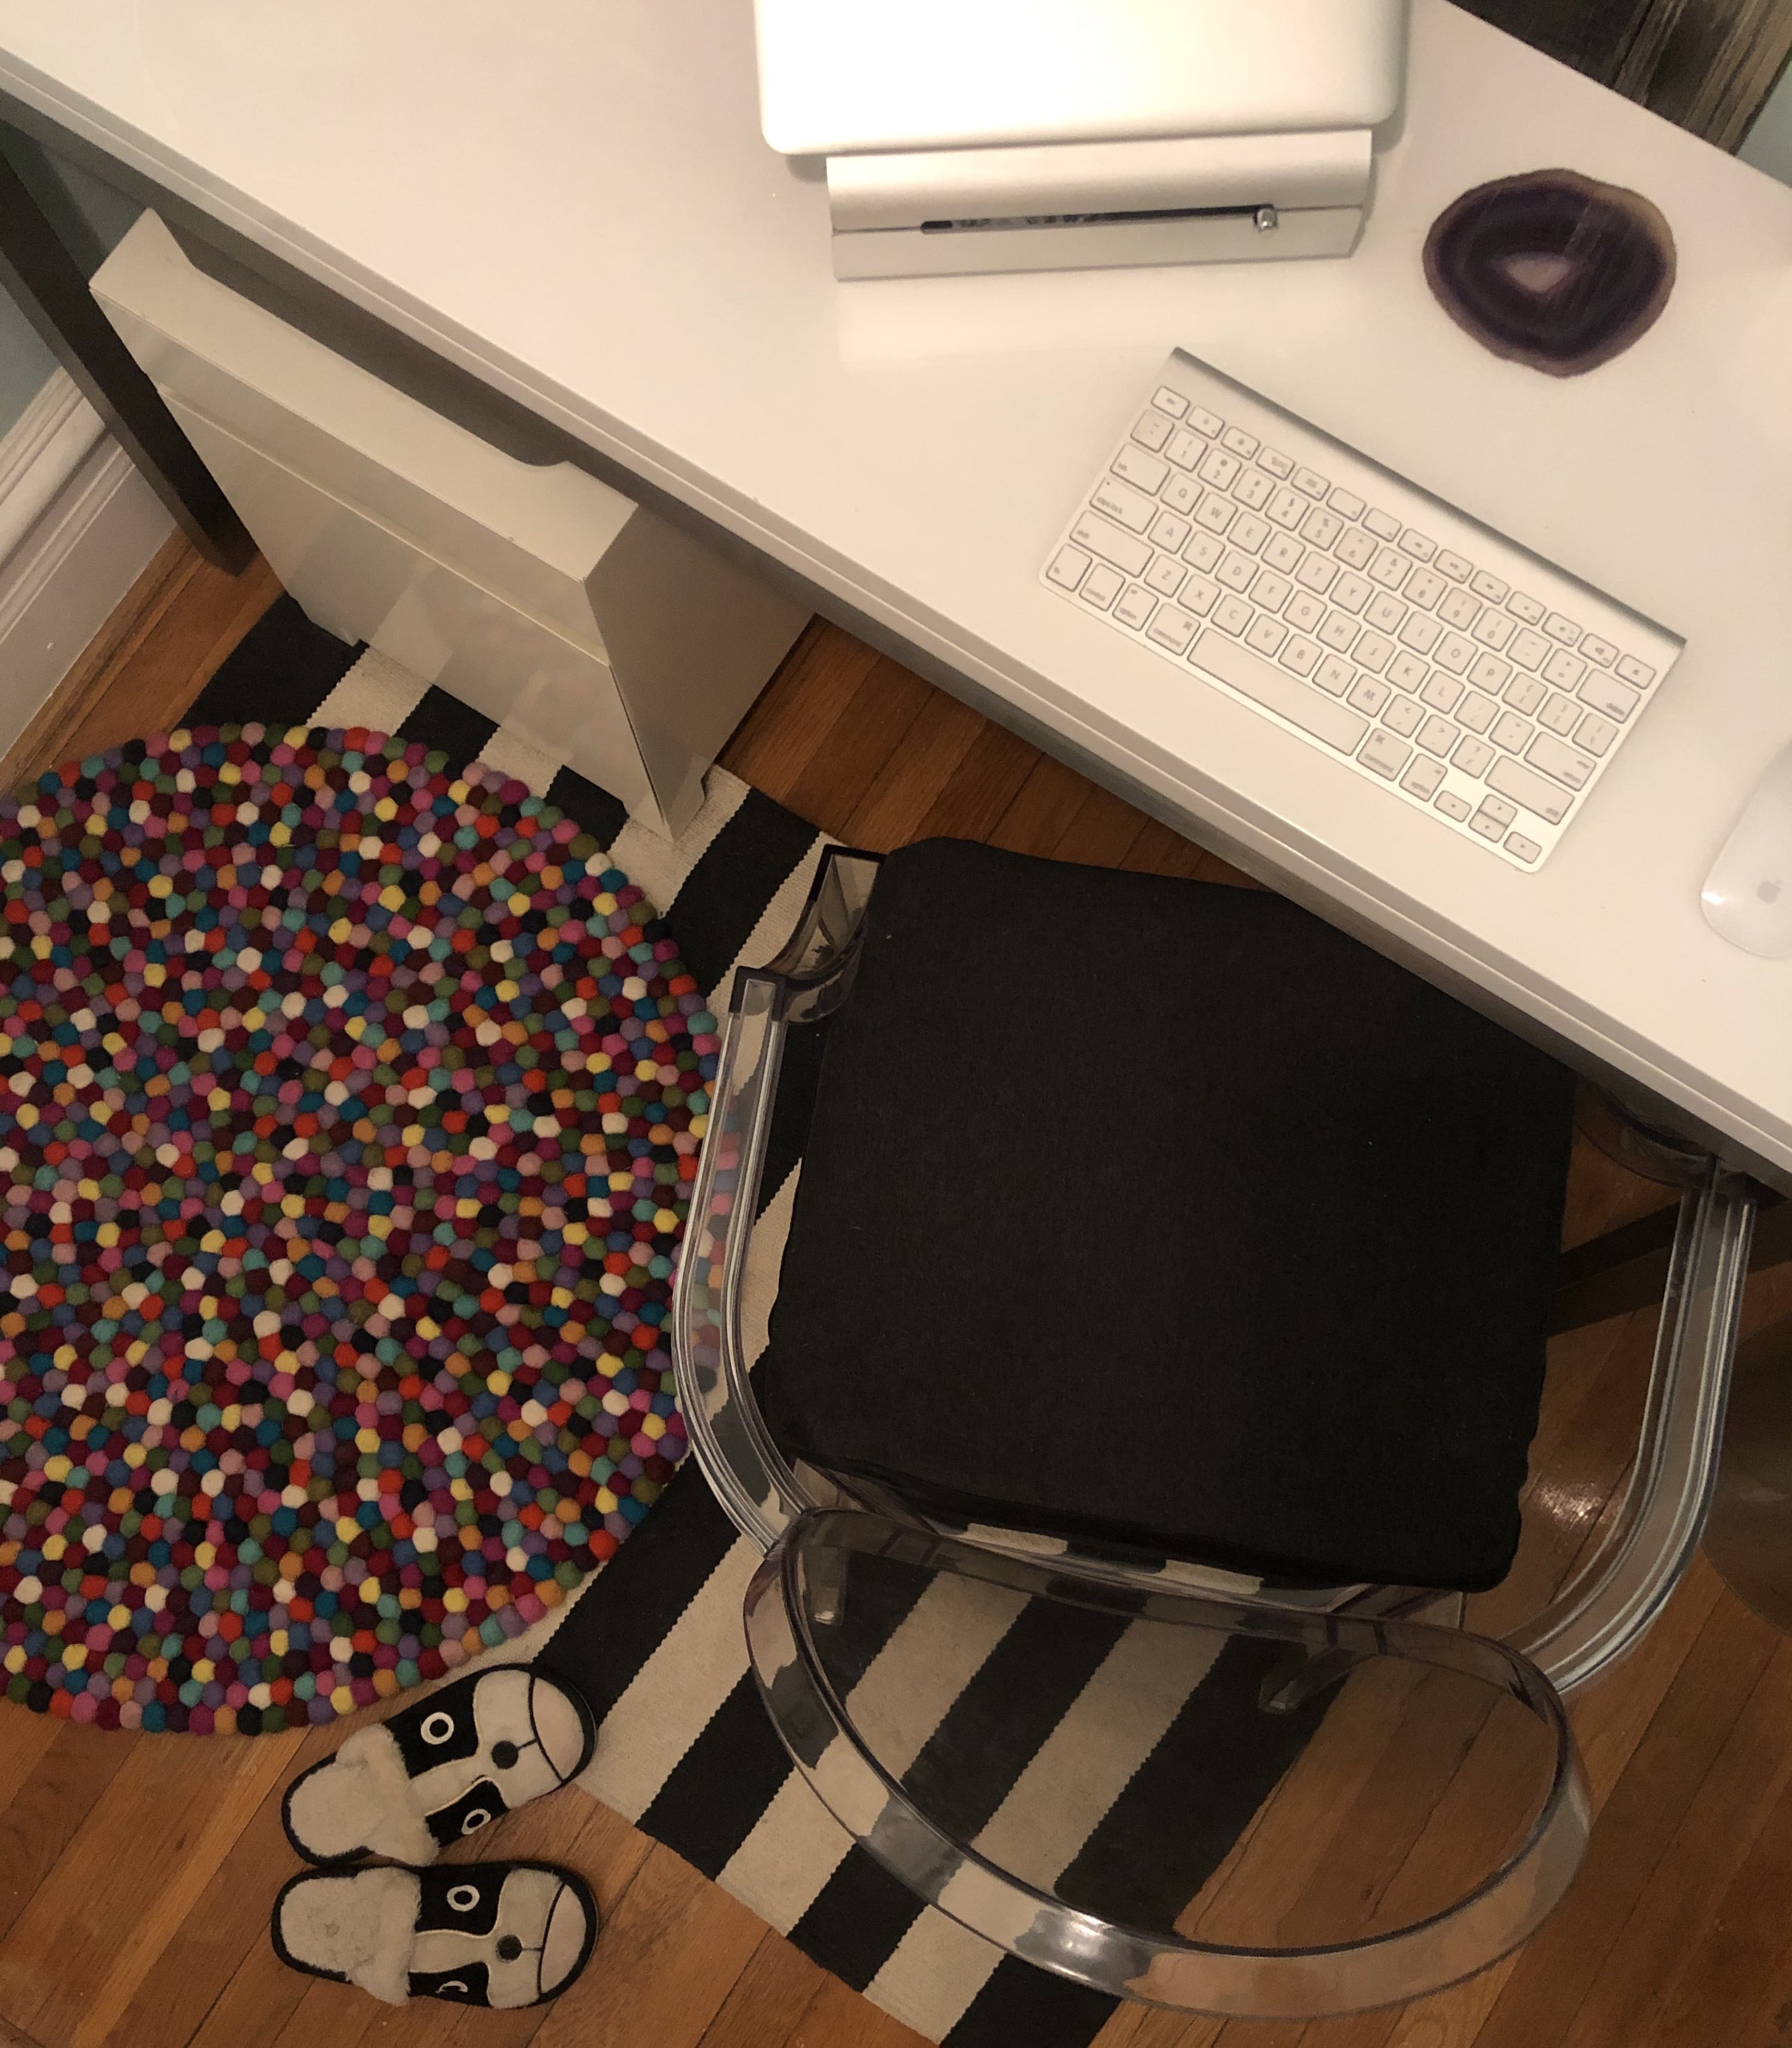 Purple Simply Seat Cushion Review